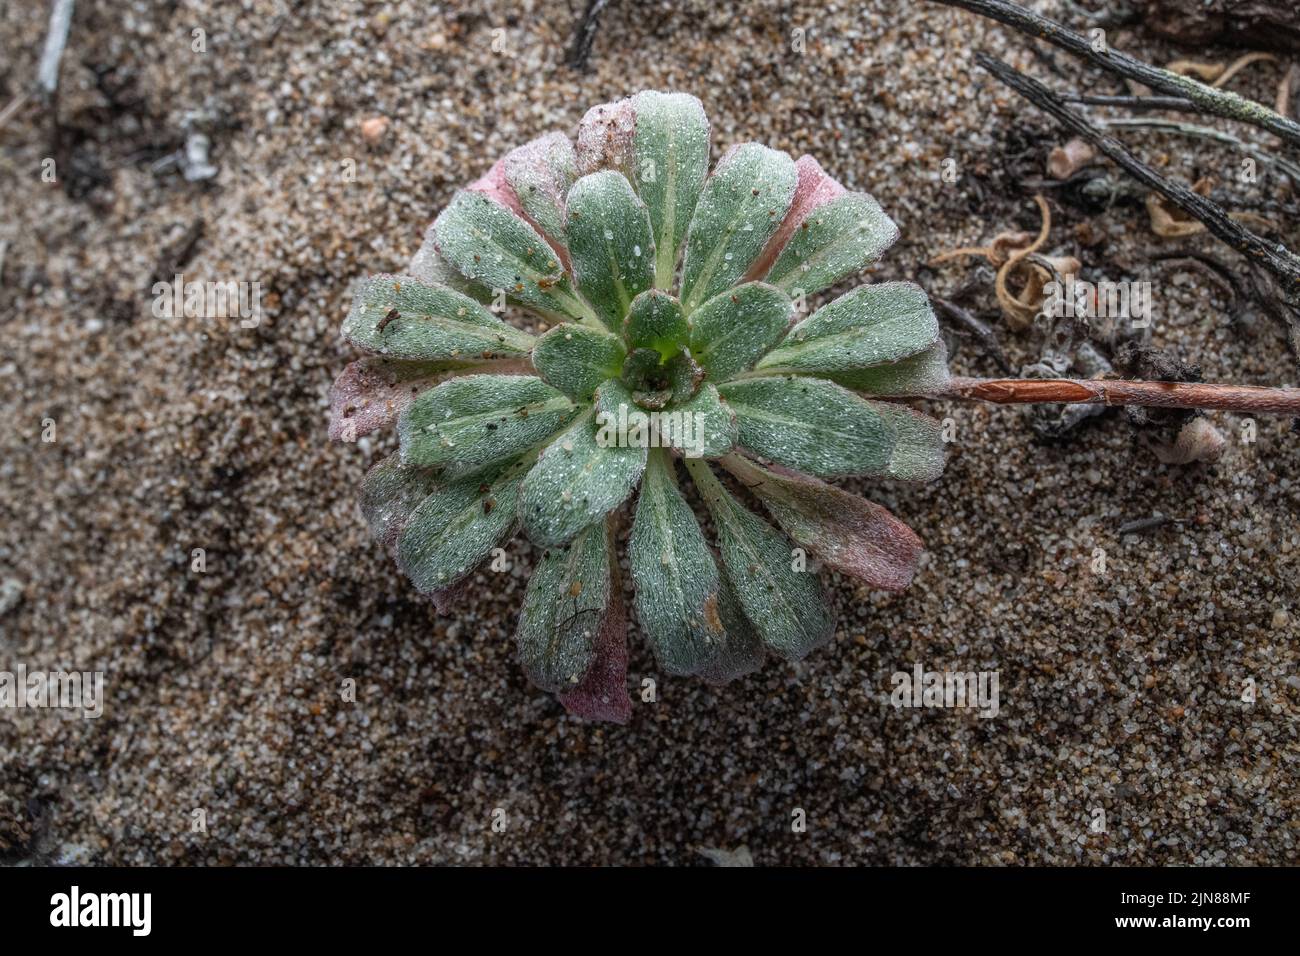 A small plant grows on coastal sand dunes in California, USA. Stock Photo